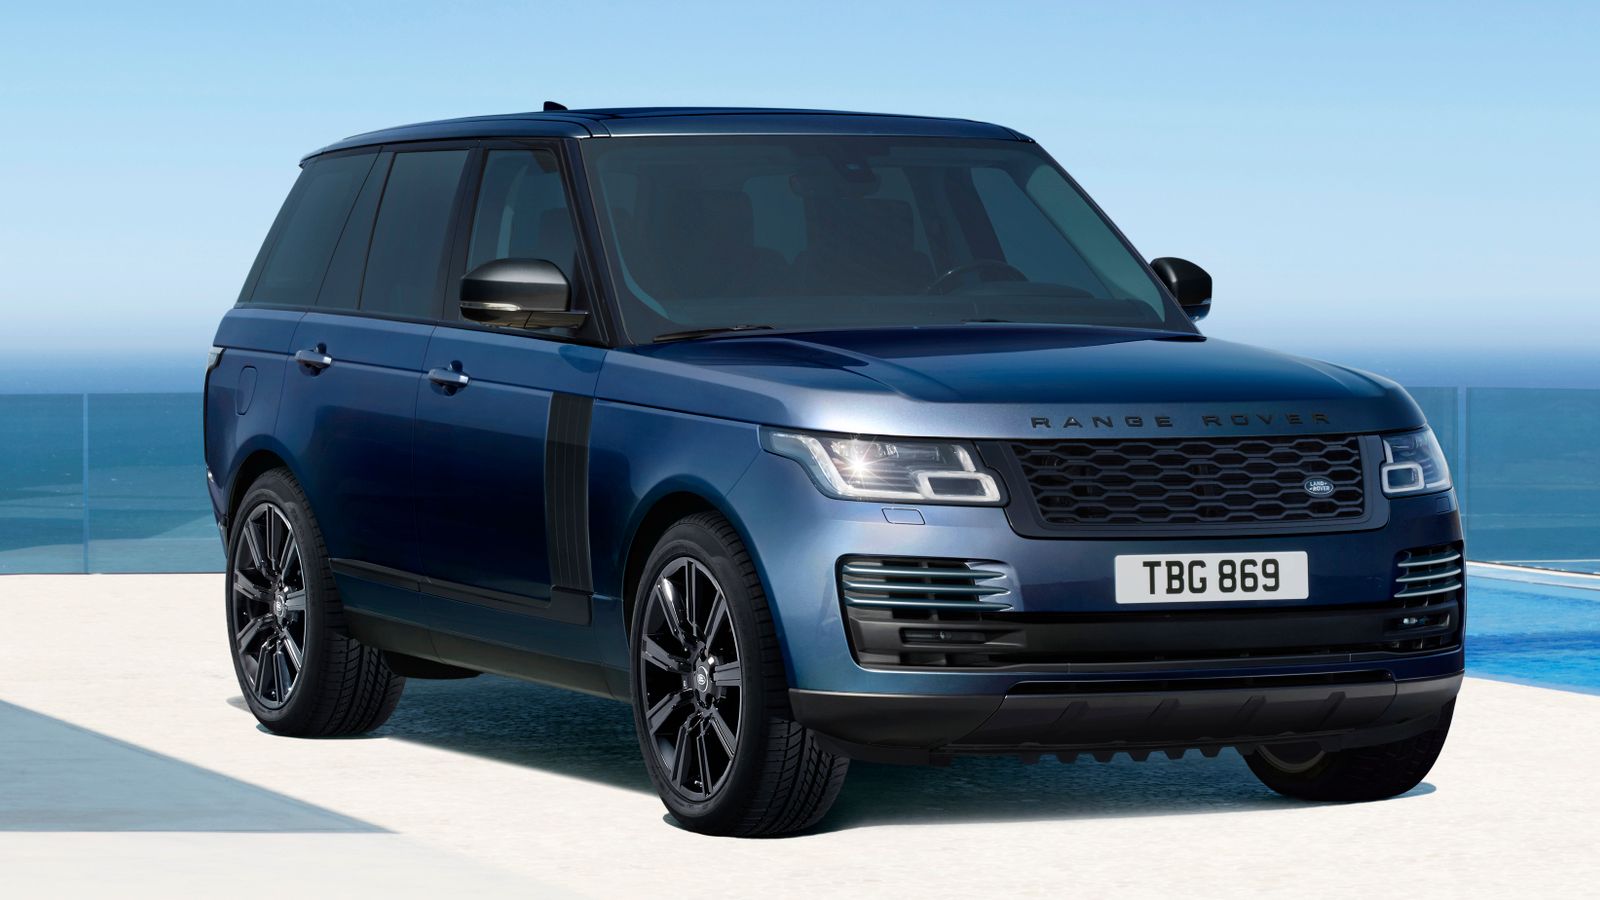 JLR invests £1m to help police combat car thieves and allay owner concerns